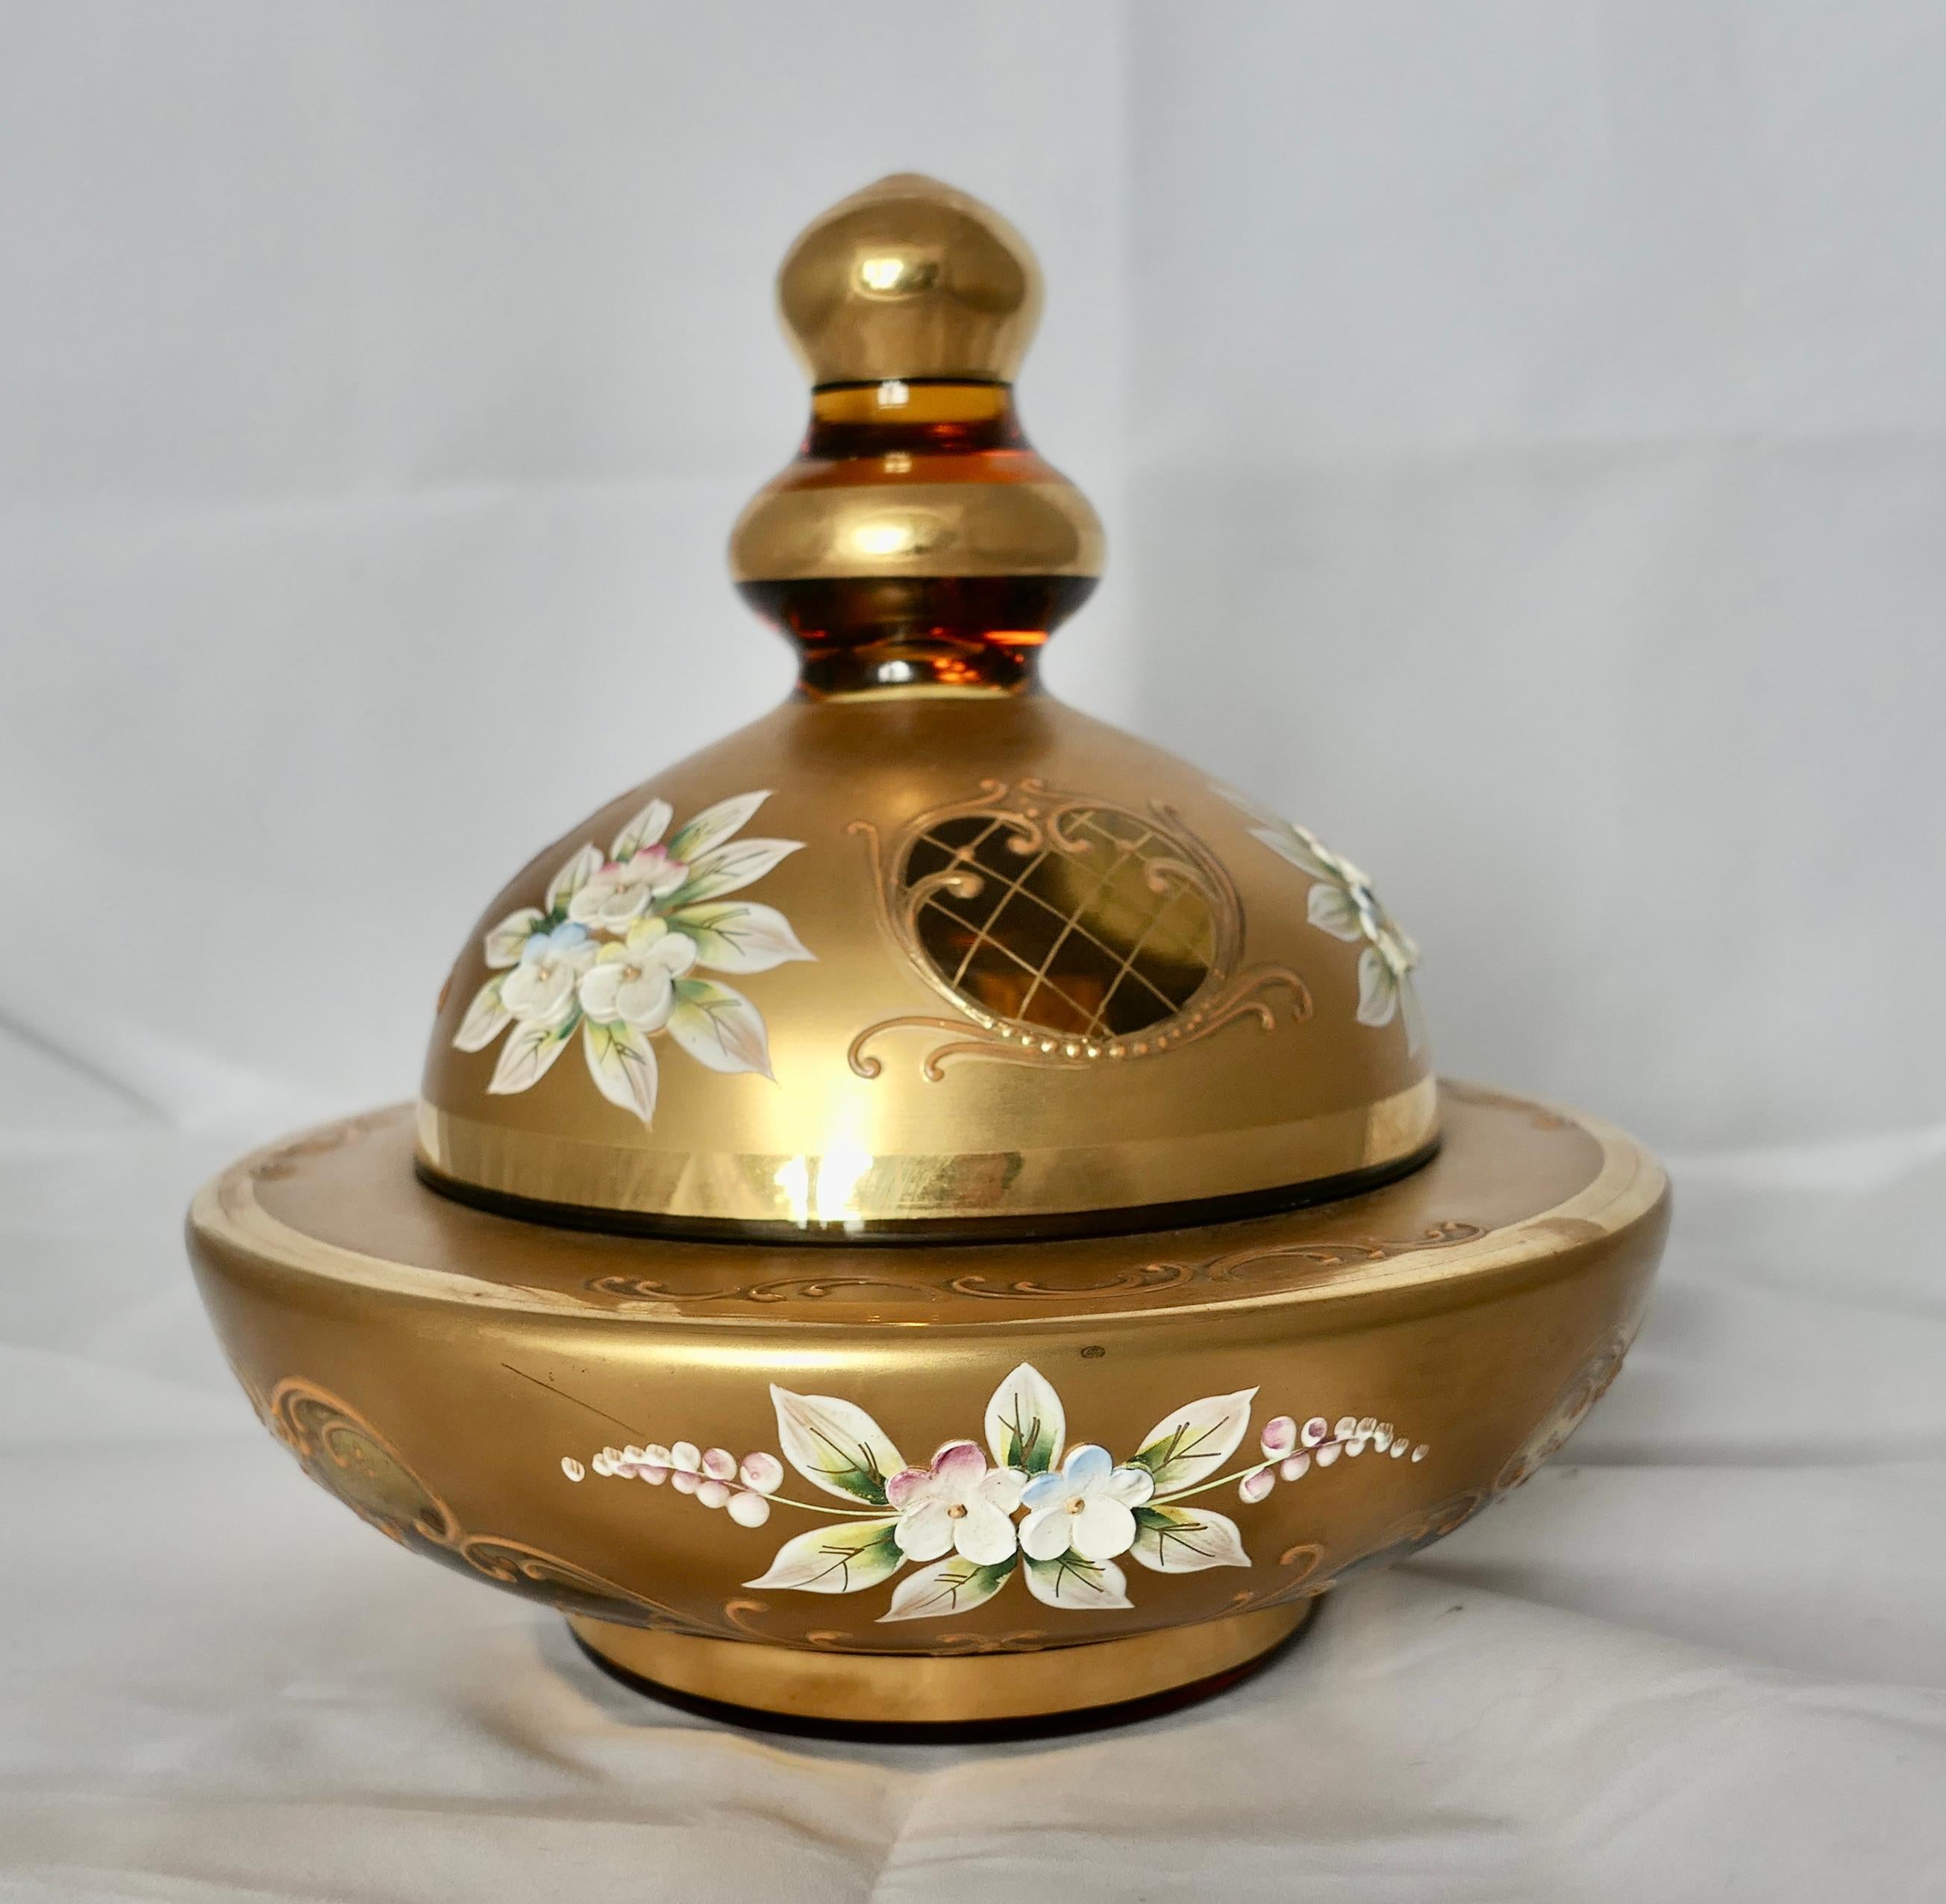 Venetian Gold Enamel Murano Glass BonBonier with Lid

A lovely mid century piece luxurious Gold on Amber Glass, with tiny flowers in relief 
The Dish is 7” in diameter and 7” high and in good condition
FB148